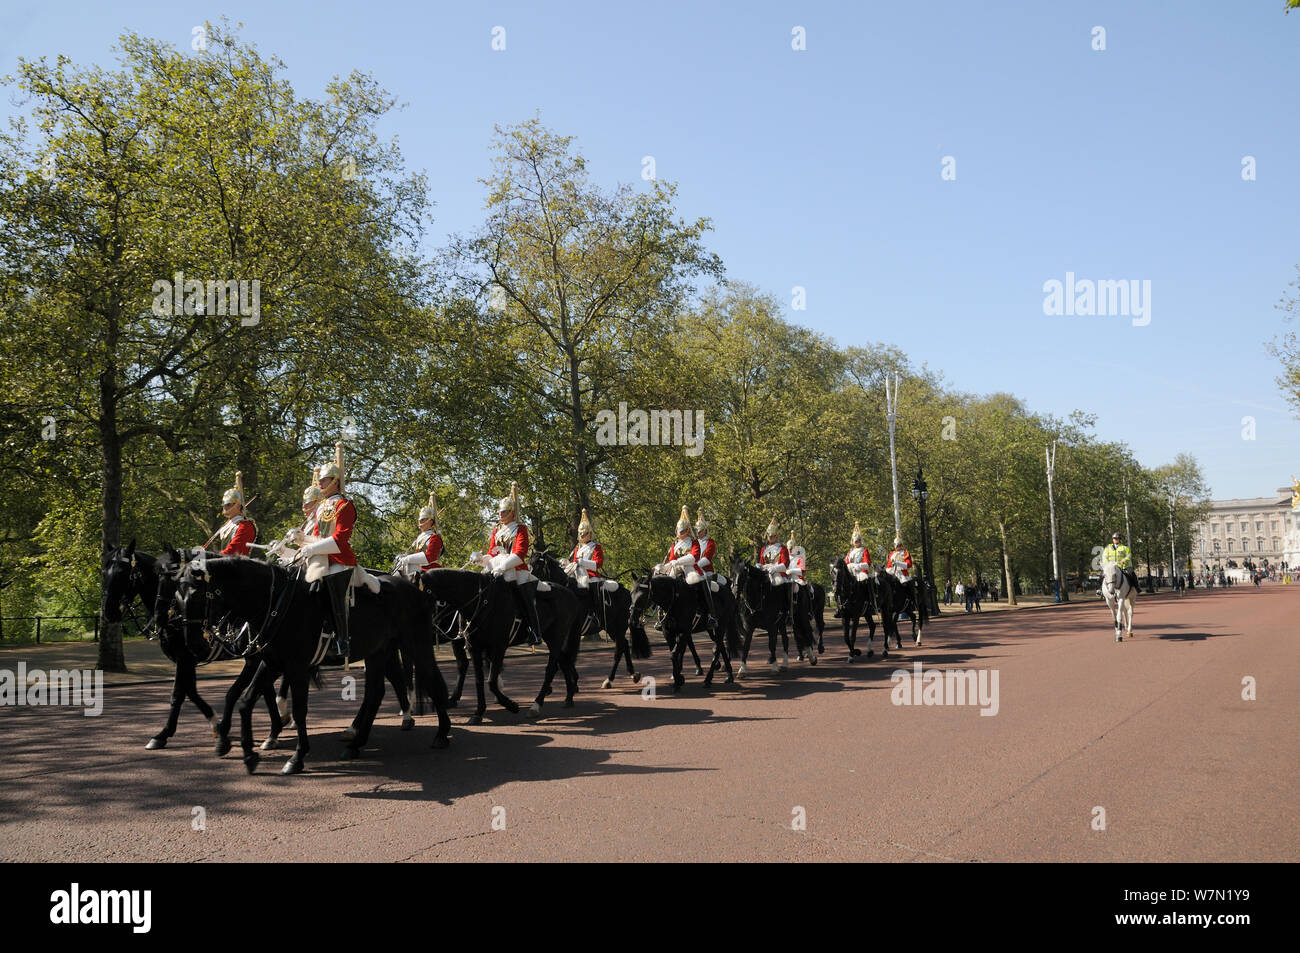 Horse Guards parading on The Mall, past avenue of London Plane Trees (Platanus x hispanica), with Buckingham Palace in the background, London, UK, May. 2012 Stock Photo